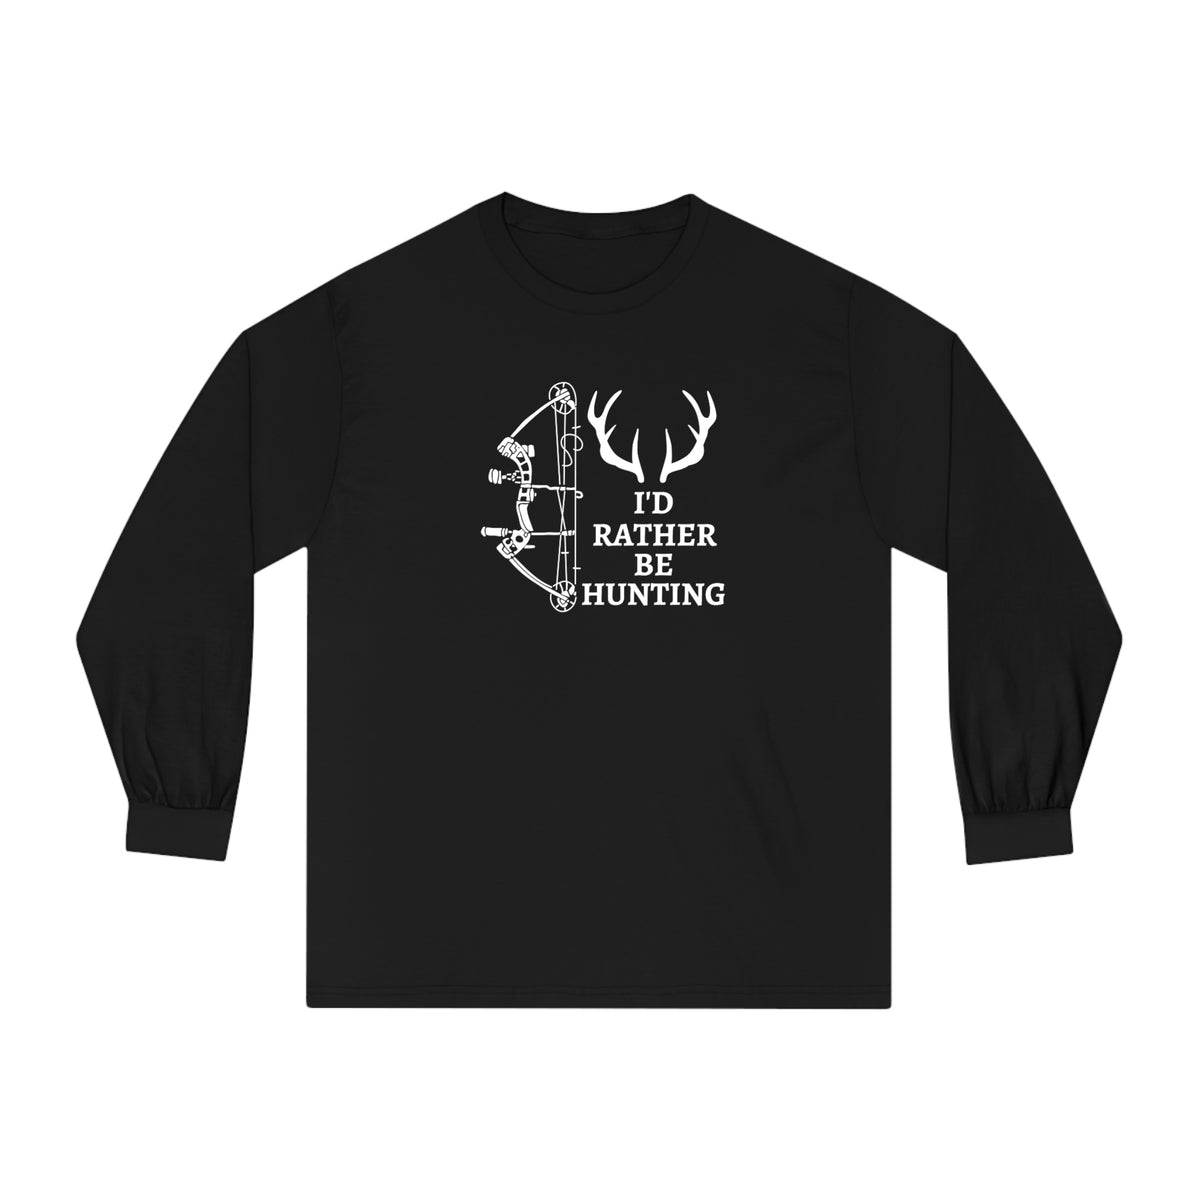 I'd Rather Be Hunting Women's Long Sleeve Tee